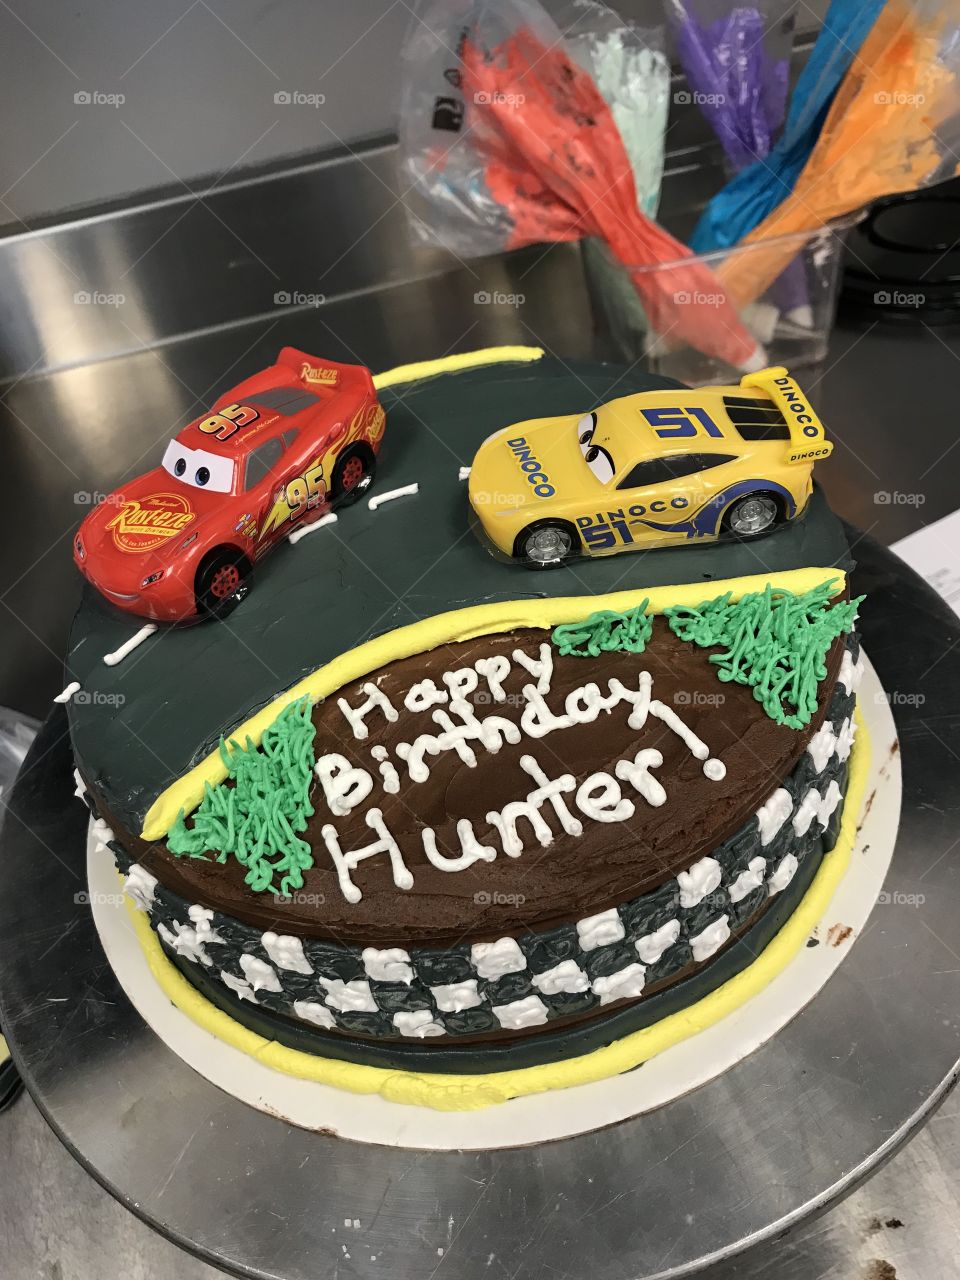 Movie, Cars birthday cake requested by customer, spent awhile to make